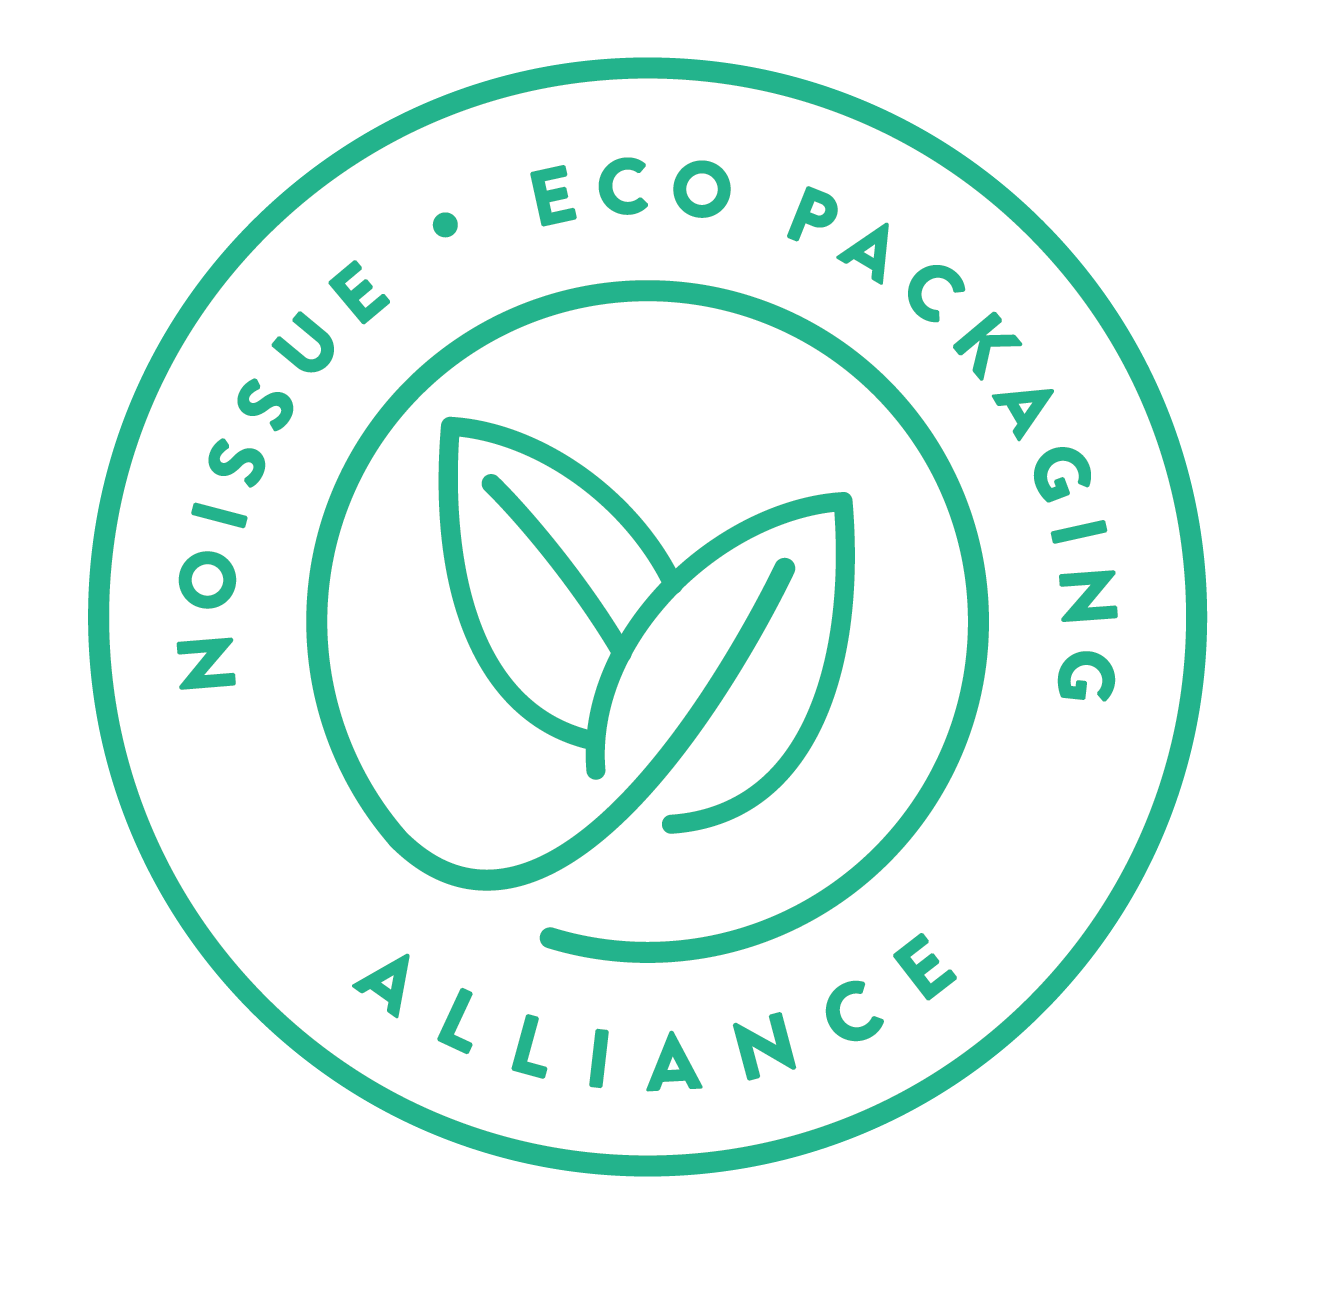 NoIssue Eco Packaging Alliance | Sustainable Packaging (Copy) (Copy) (Copy) (Copy)